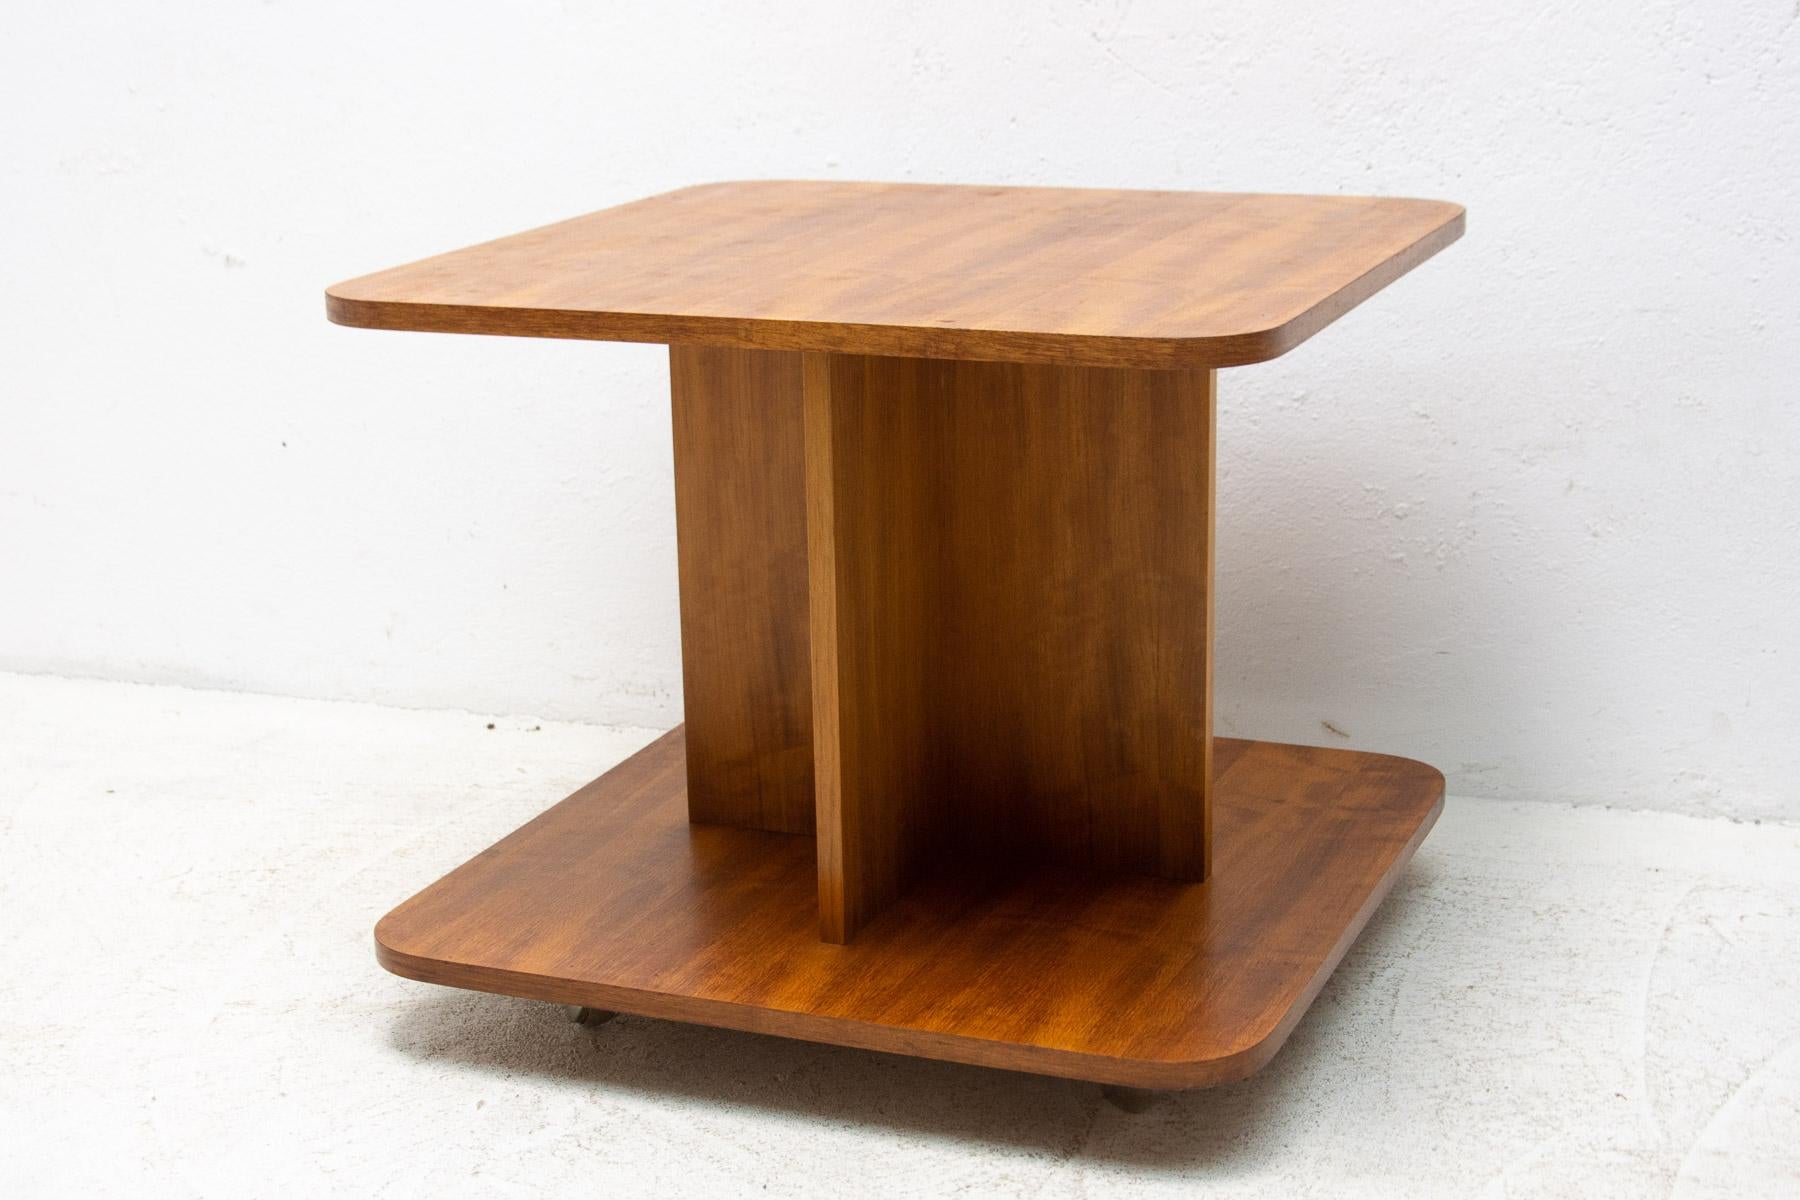 This conference coffee table on wheels was made in the 1970s in the former Czechoslovakia, probably for a Hotel or meeting room. The table is made of walnut. It is in very good condition.

Dimensions:

Height: 55 cm

Width: 66 cm

Depth 66